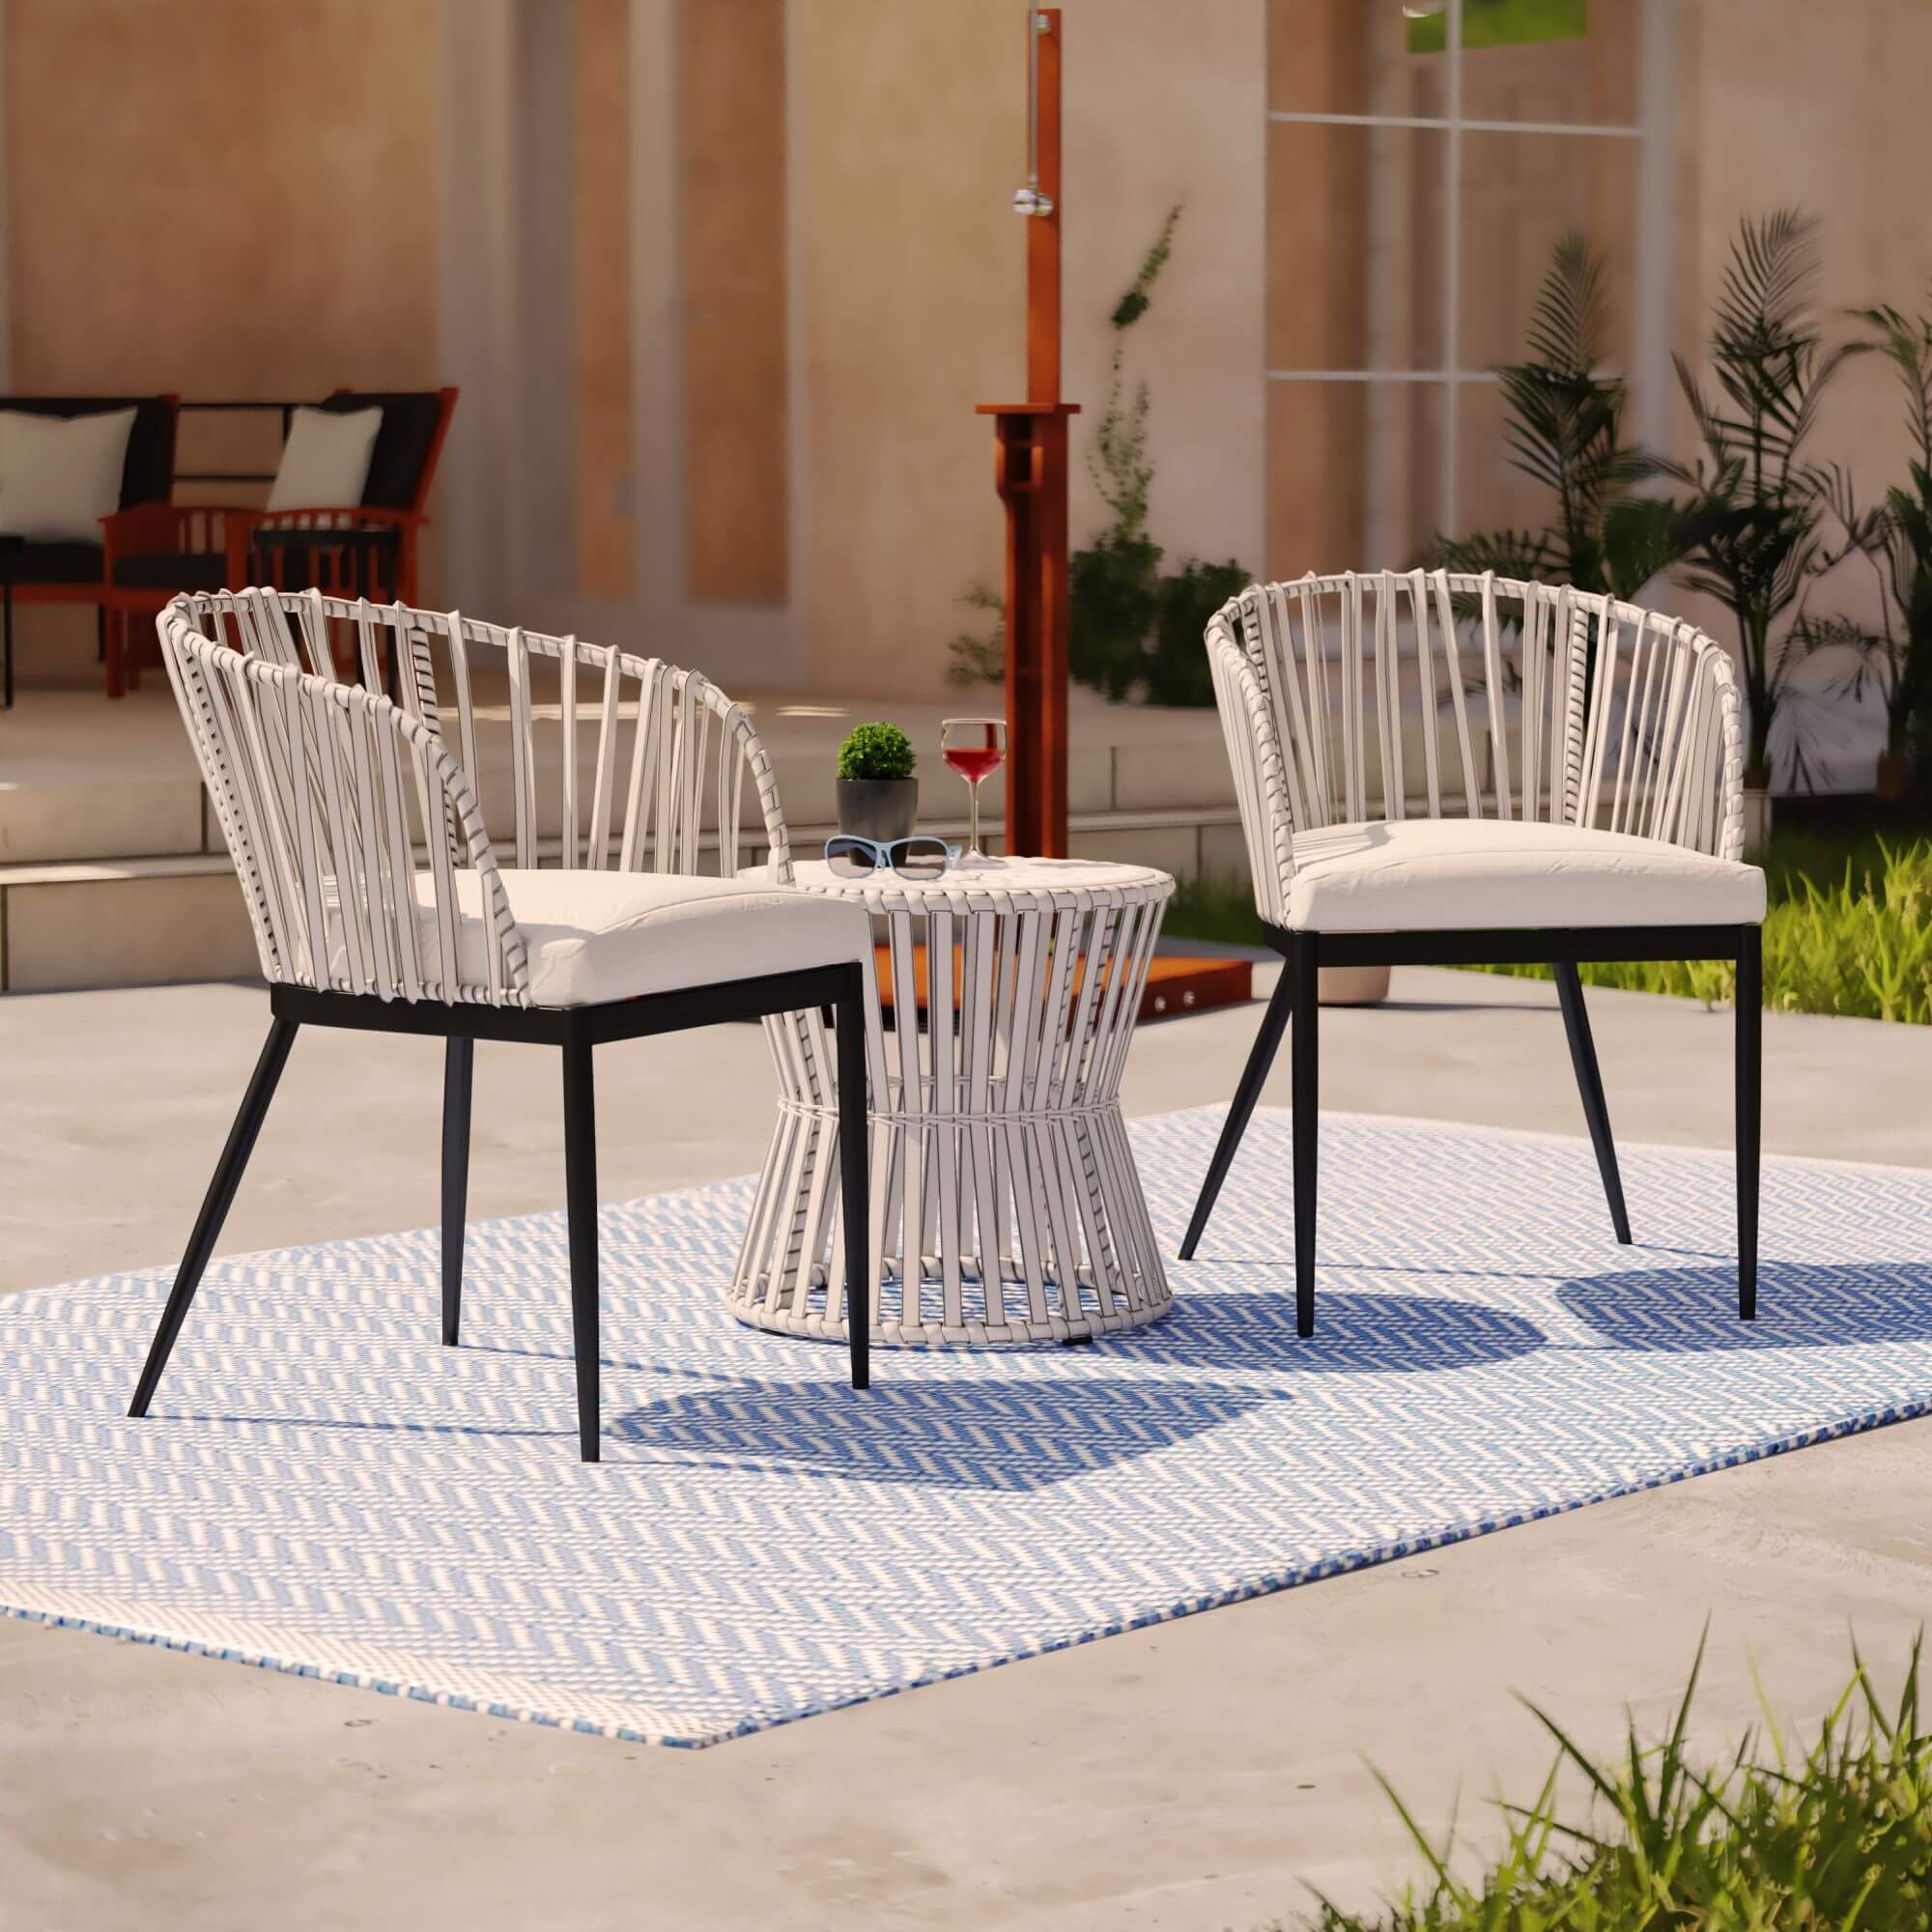 Melilani Outdoor Chairs w/ Cushions – 2pc Set